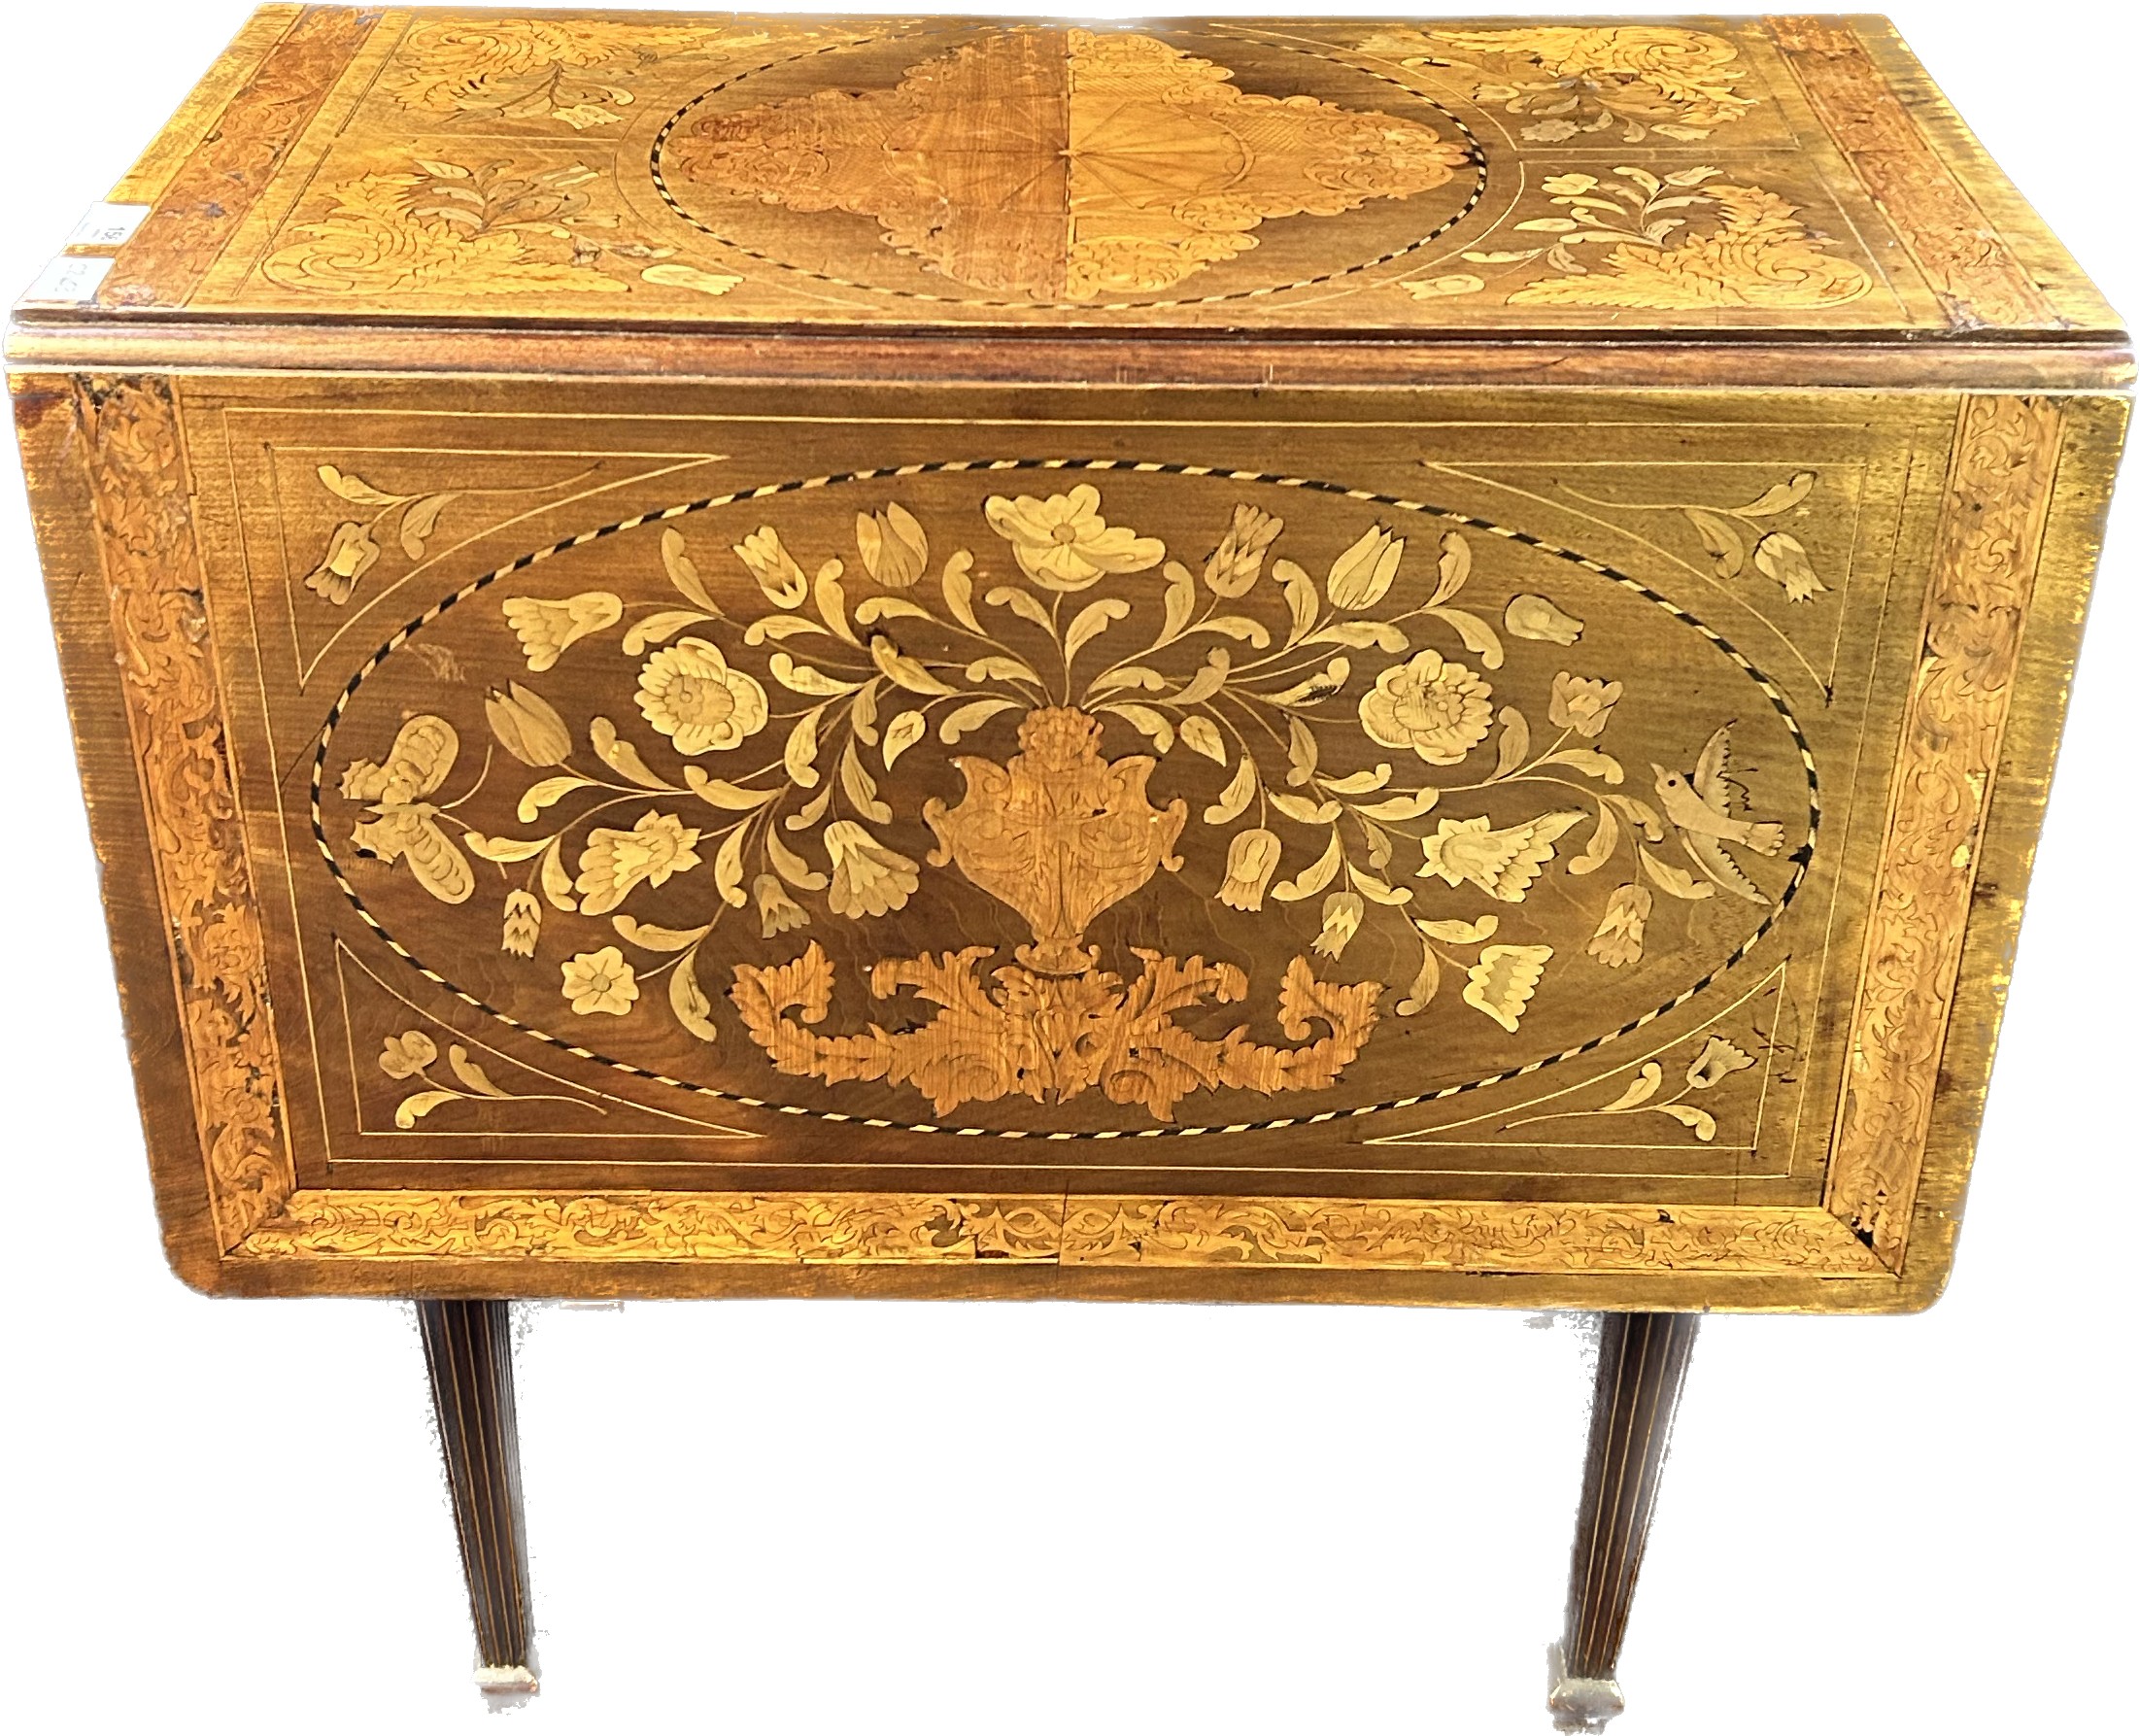 19th century Dutch table, the drop ends raising to a marquetry surface, the base with further - Image 4 of 8